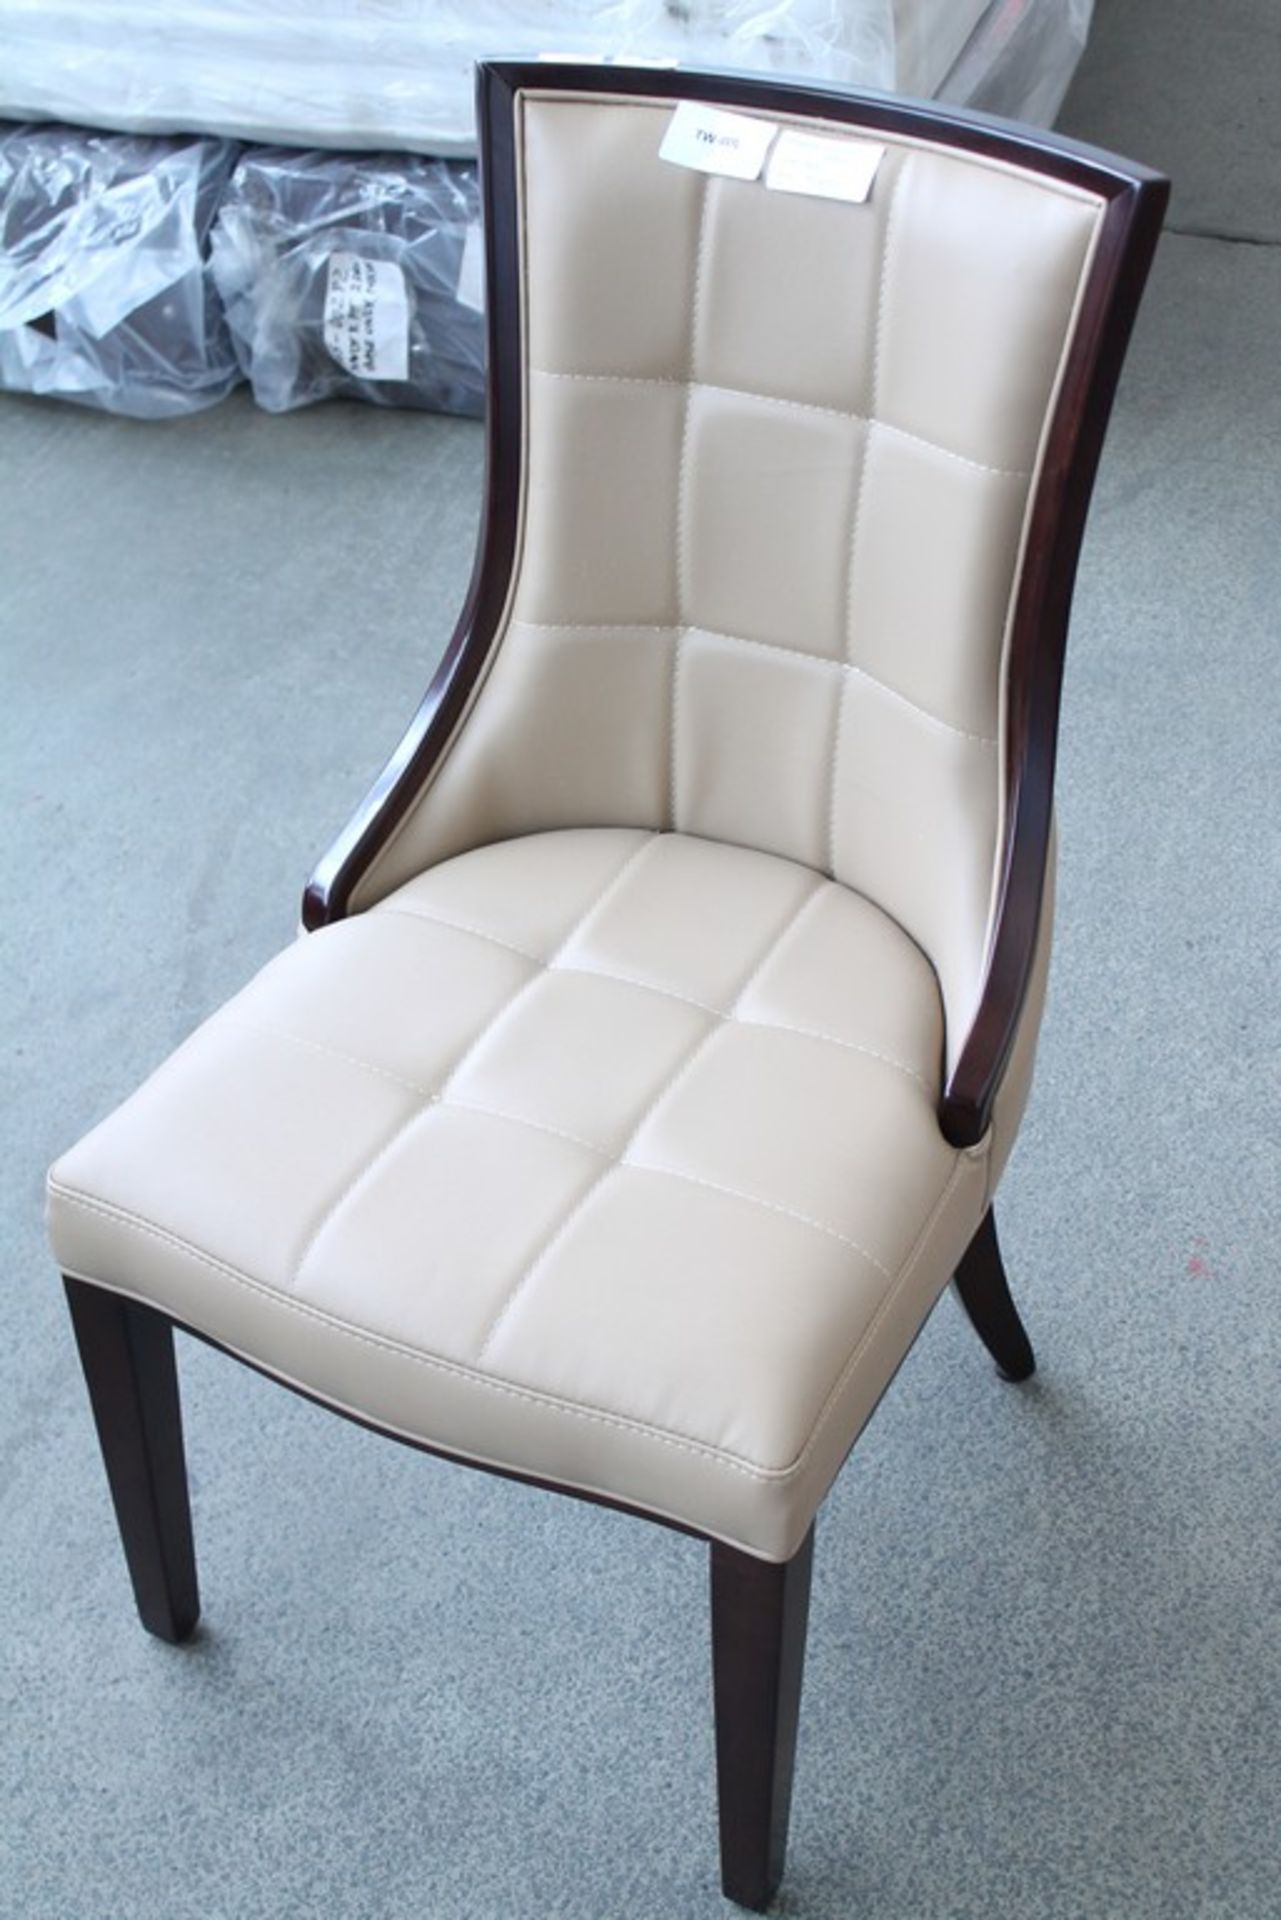 4 x MARCIELLO DINING CHAIR RRP £170  *PLEASE NOTE THAT THE BID PRICE IS MULTIPLIED BY THE NUMBER